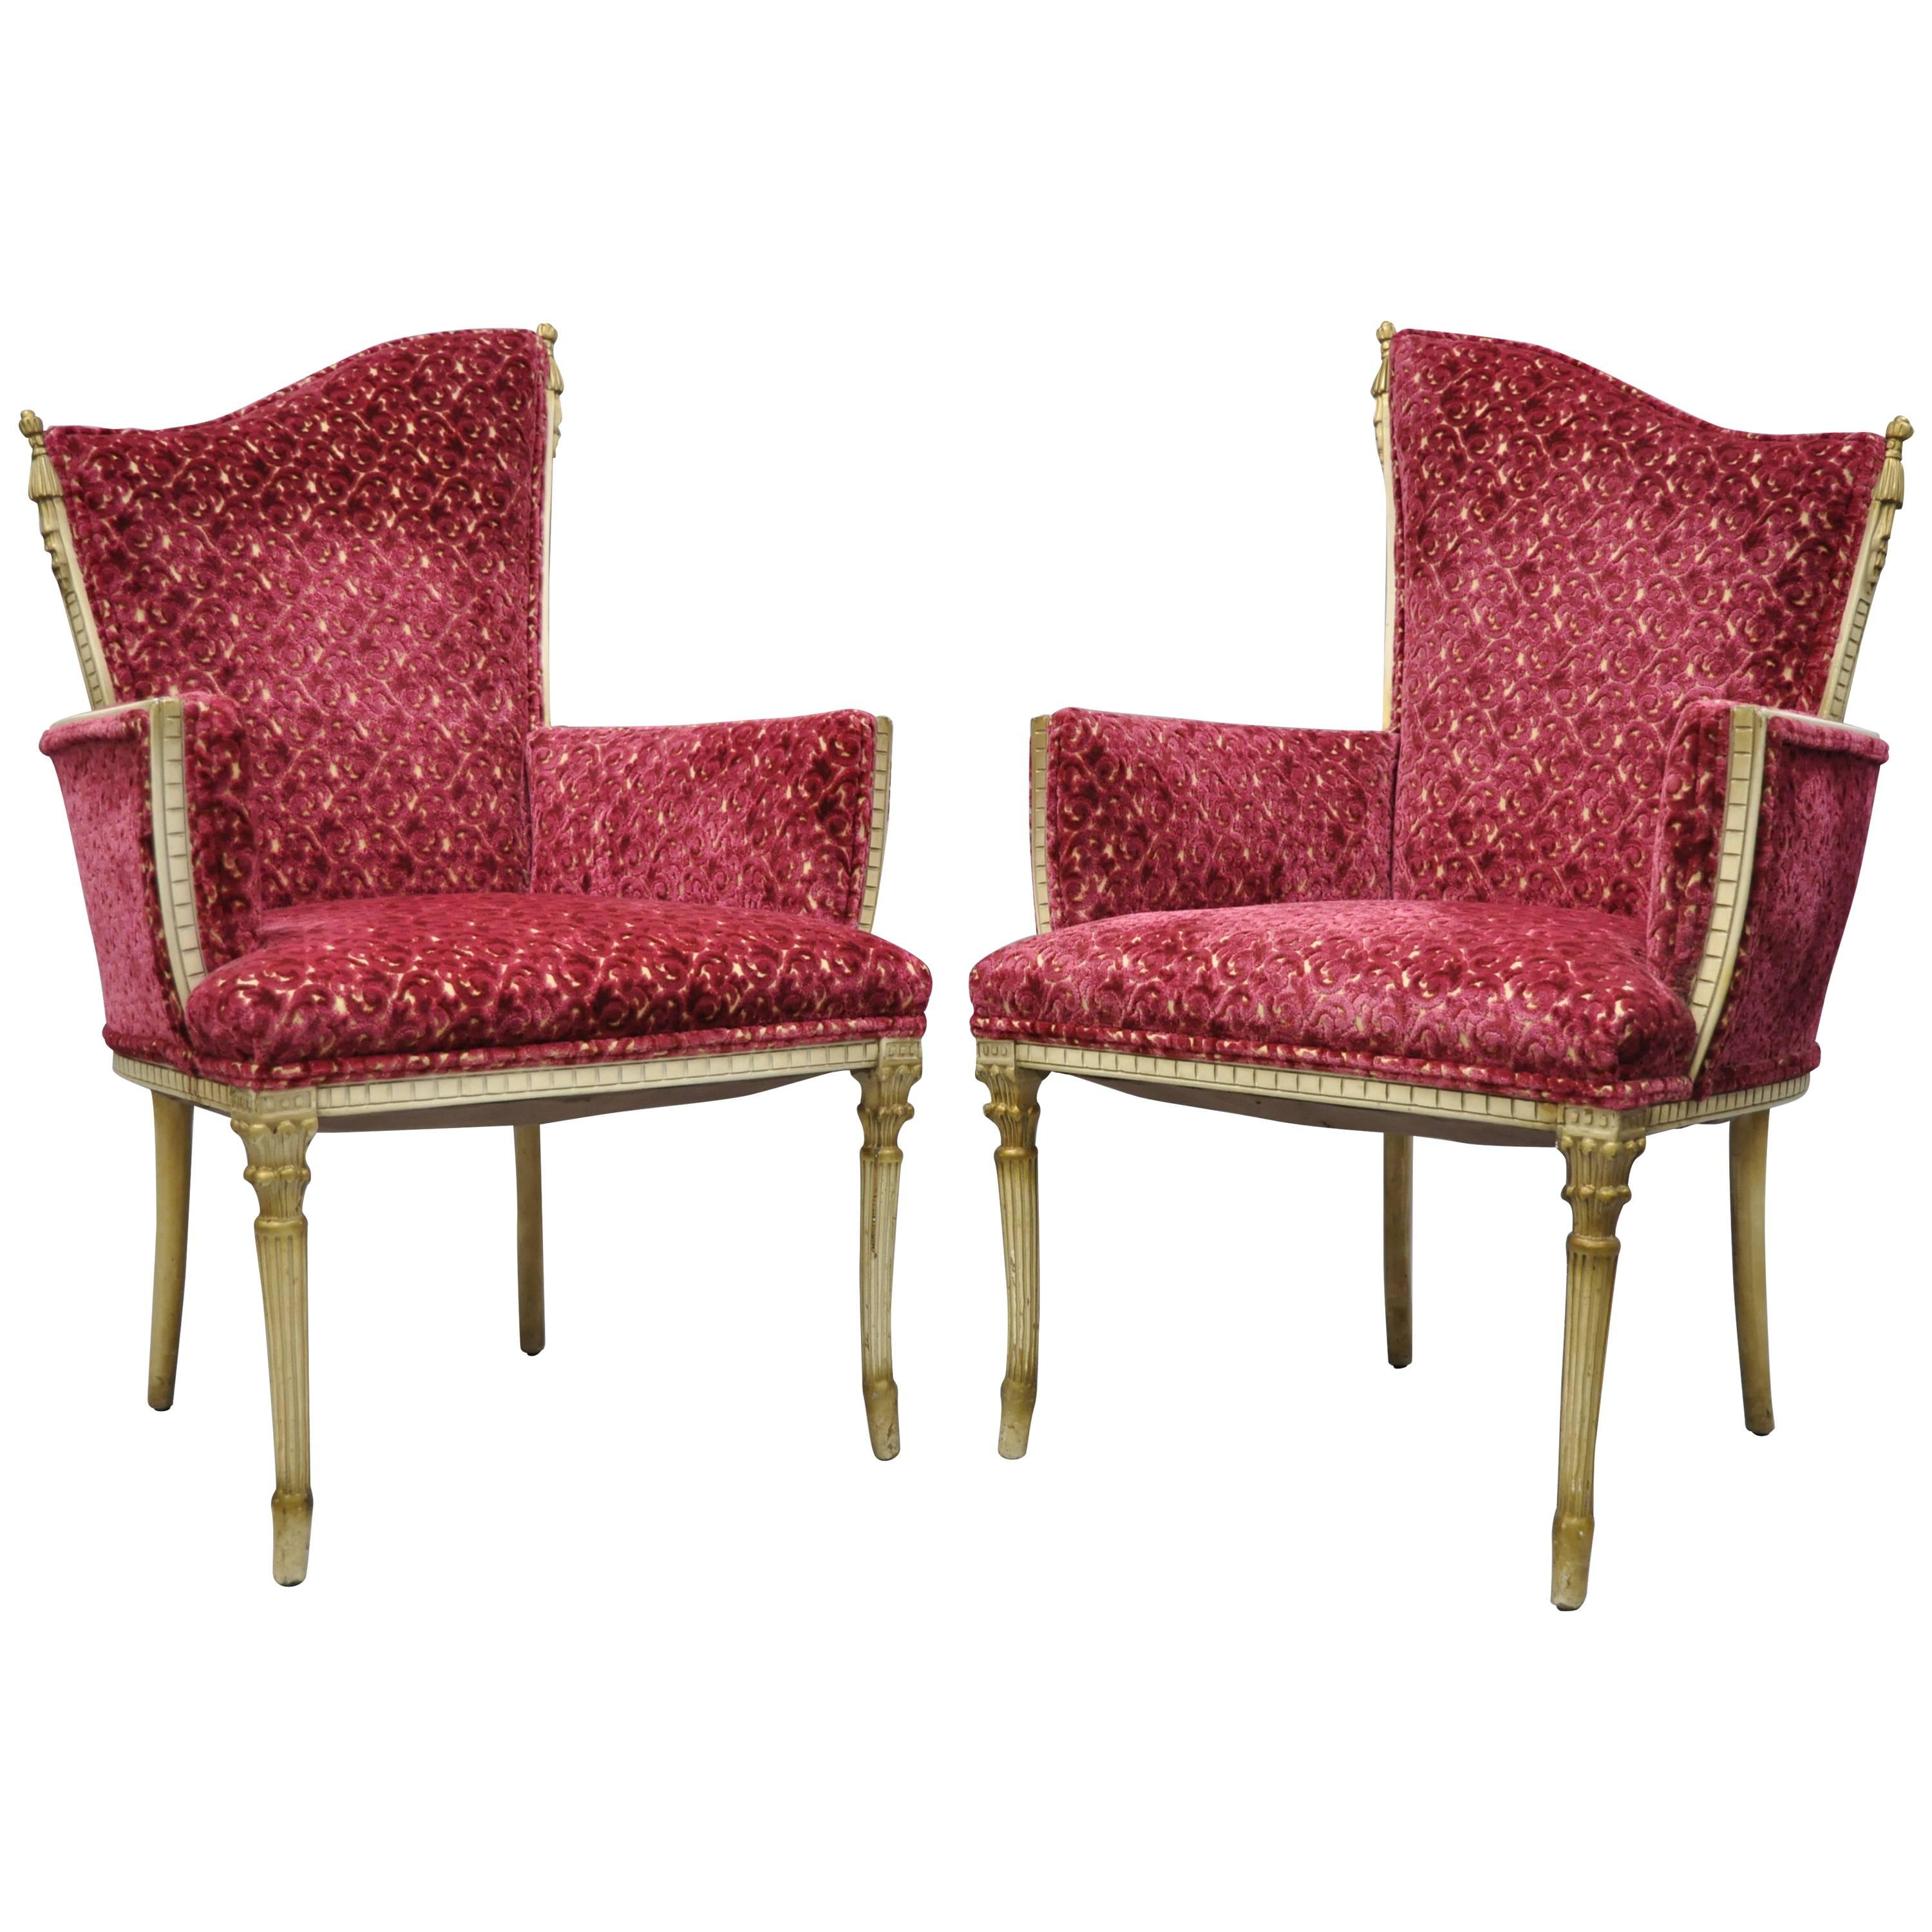 Pair of Hollywood Regency French Style Carved Tassel Fireside Lounge Chairs Red